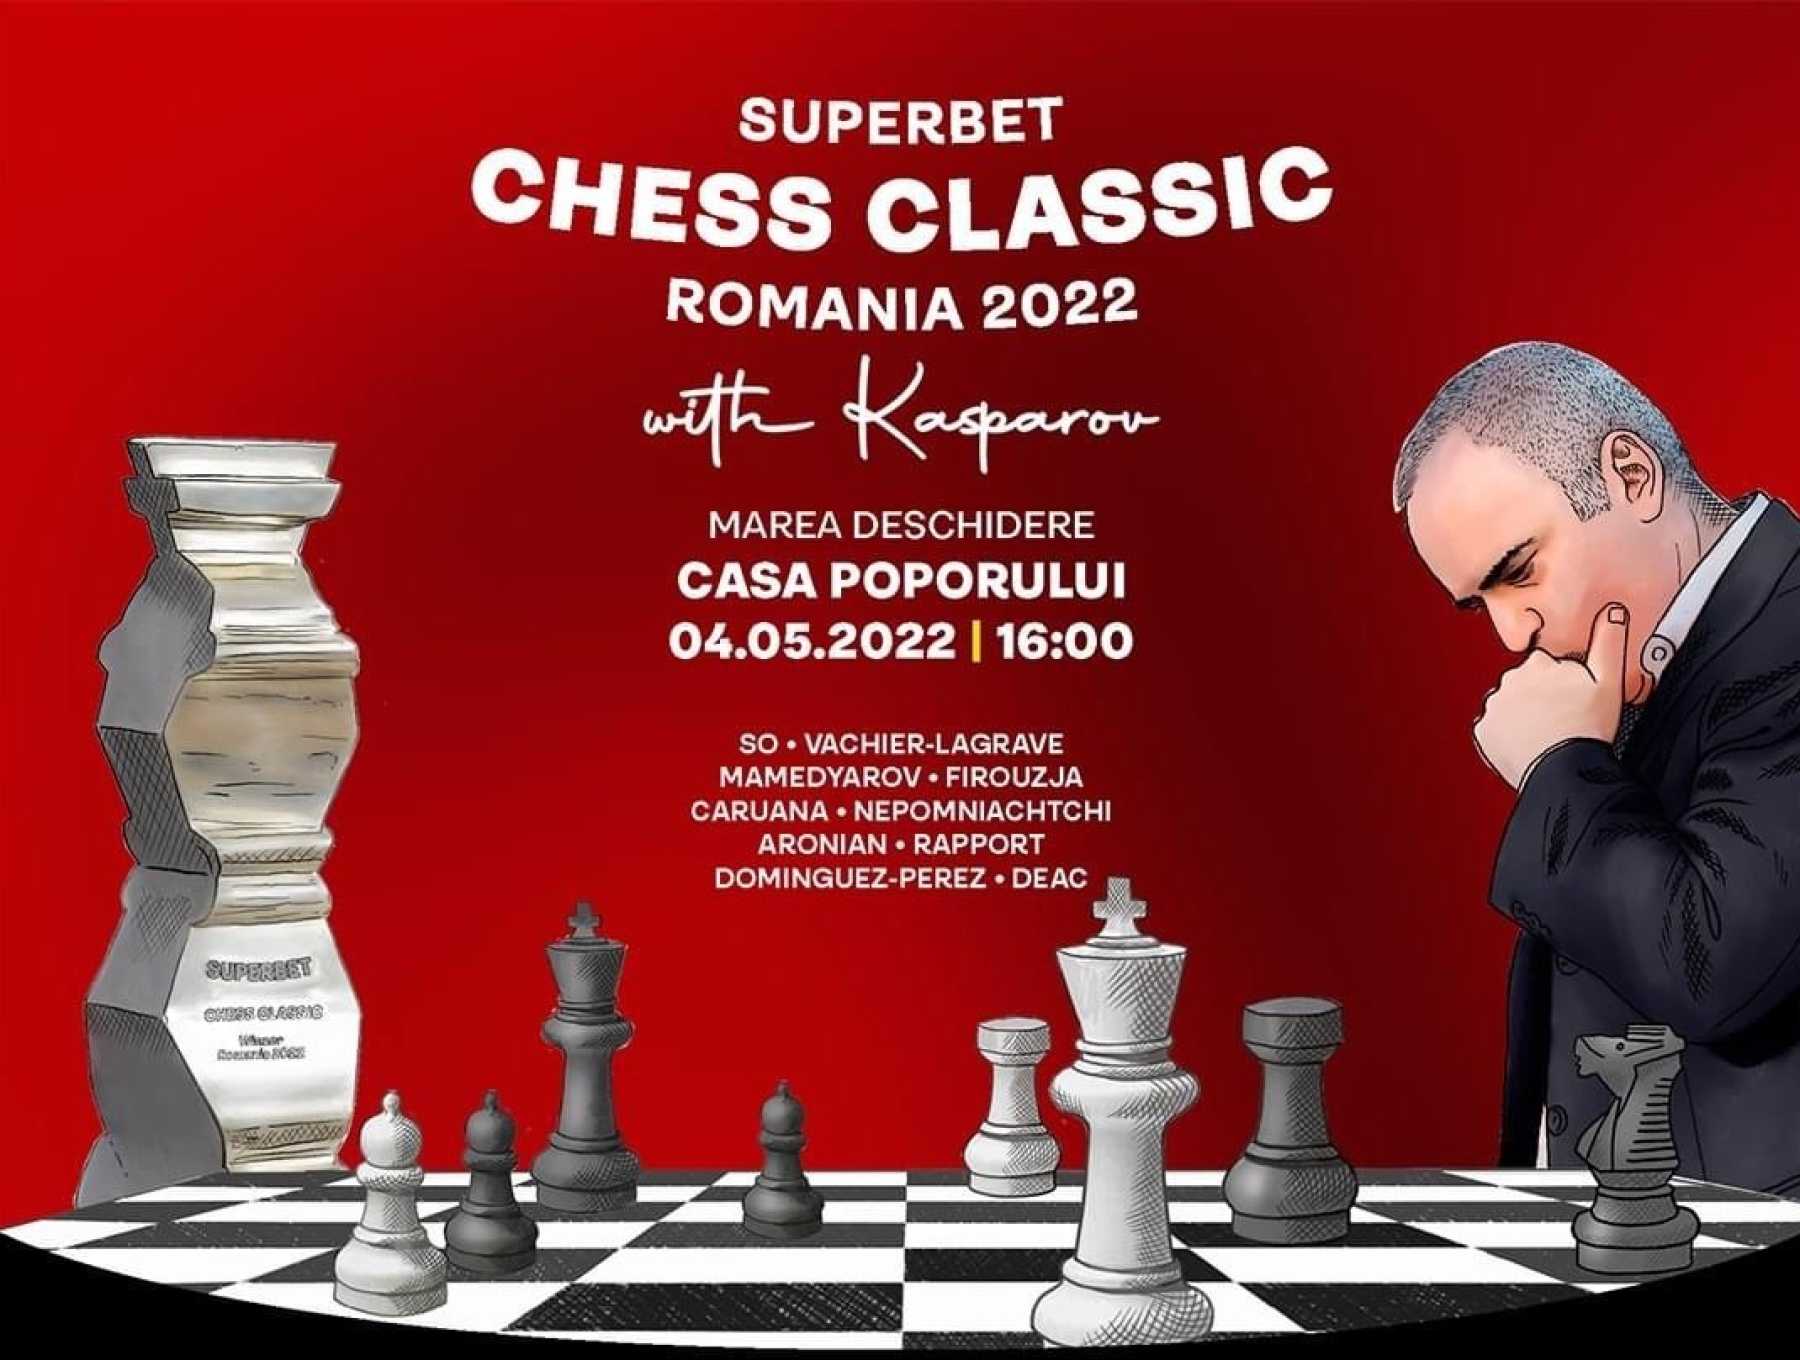 One United Properties supports Superbet Chess Classic Romania 2022, an event starring prominent chess personalities such as Garry Kasparov